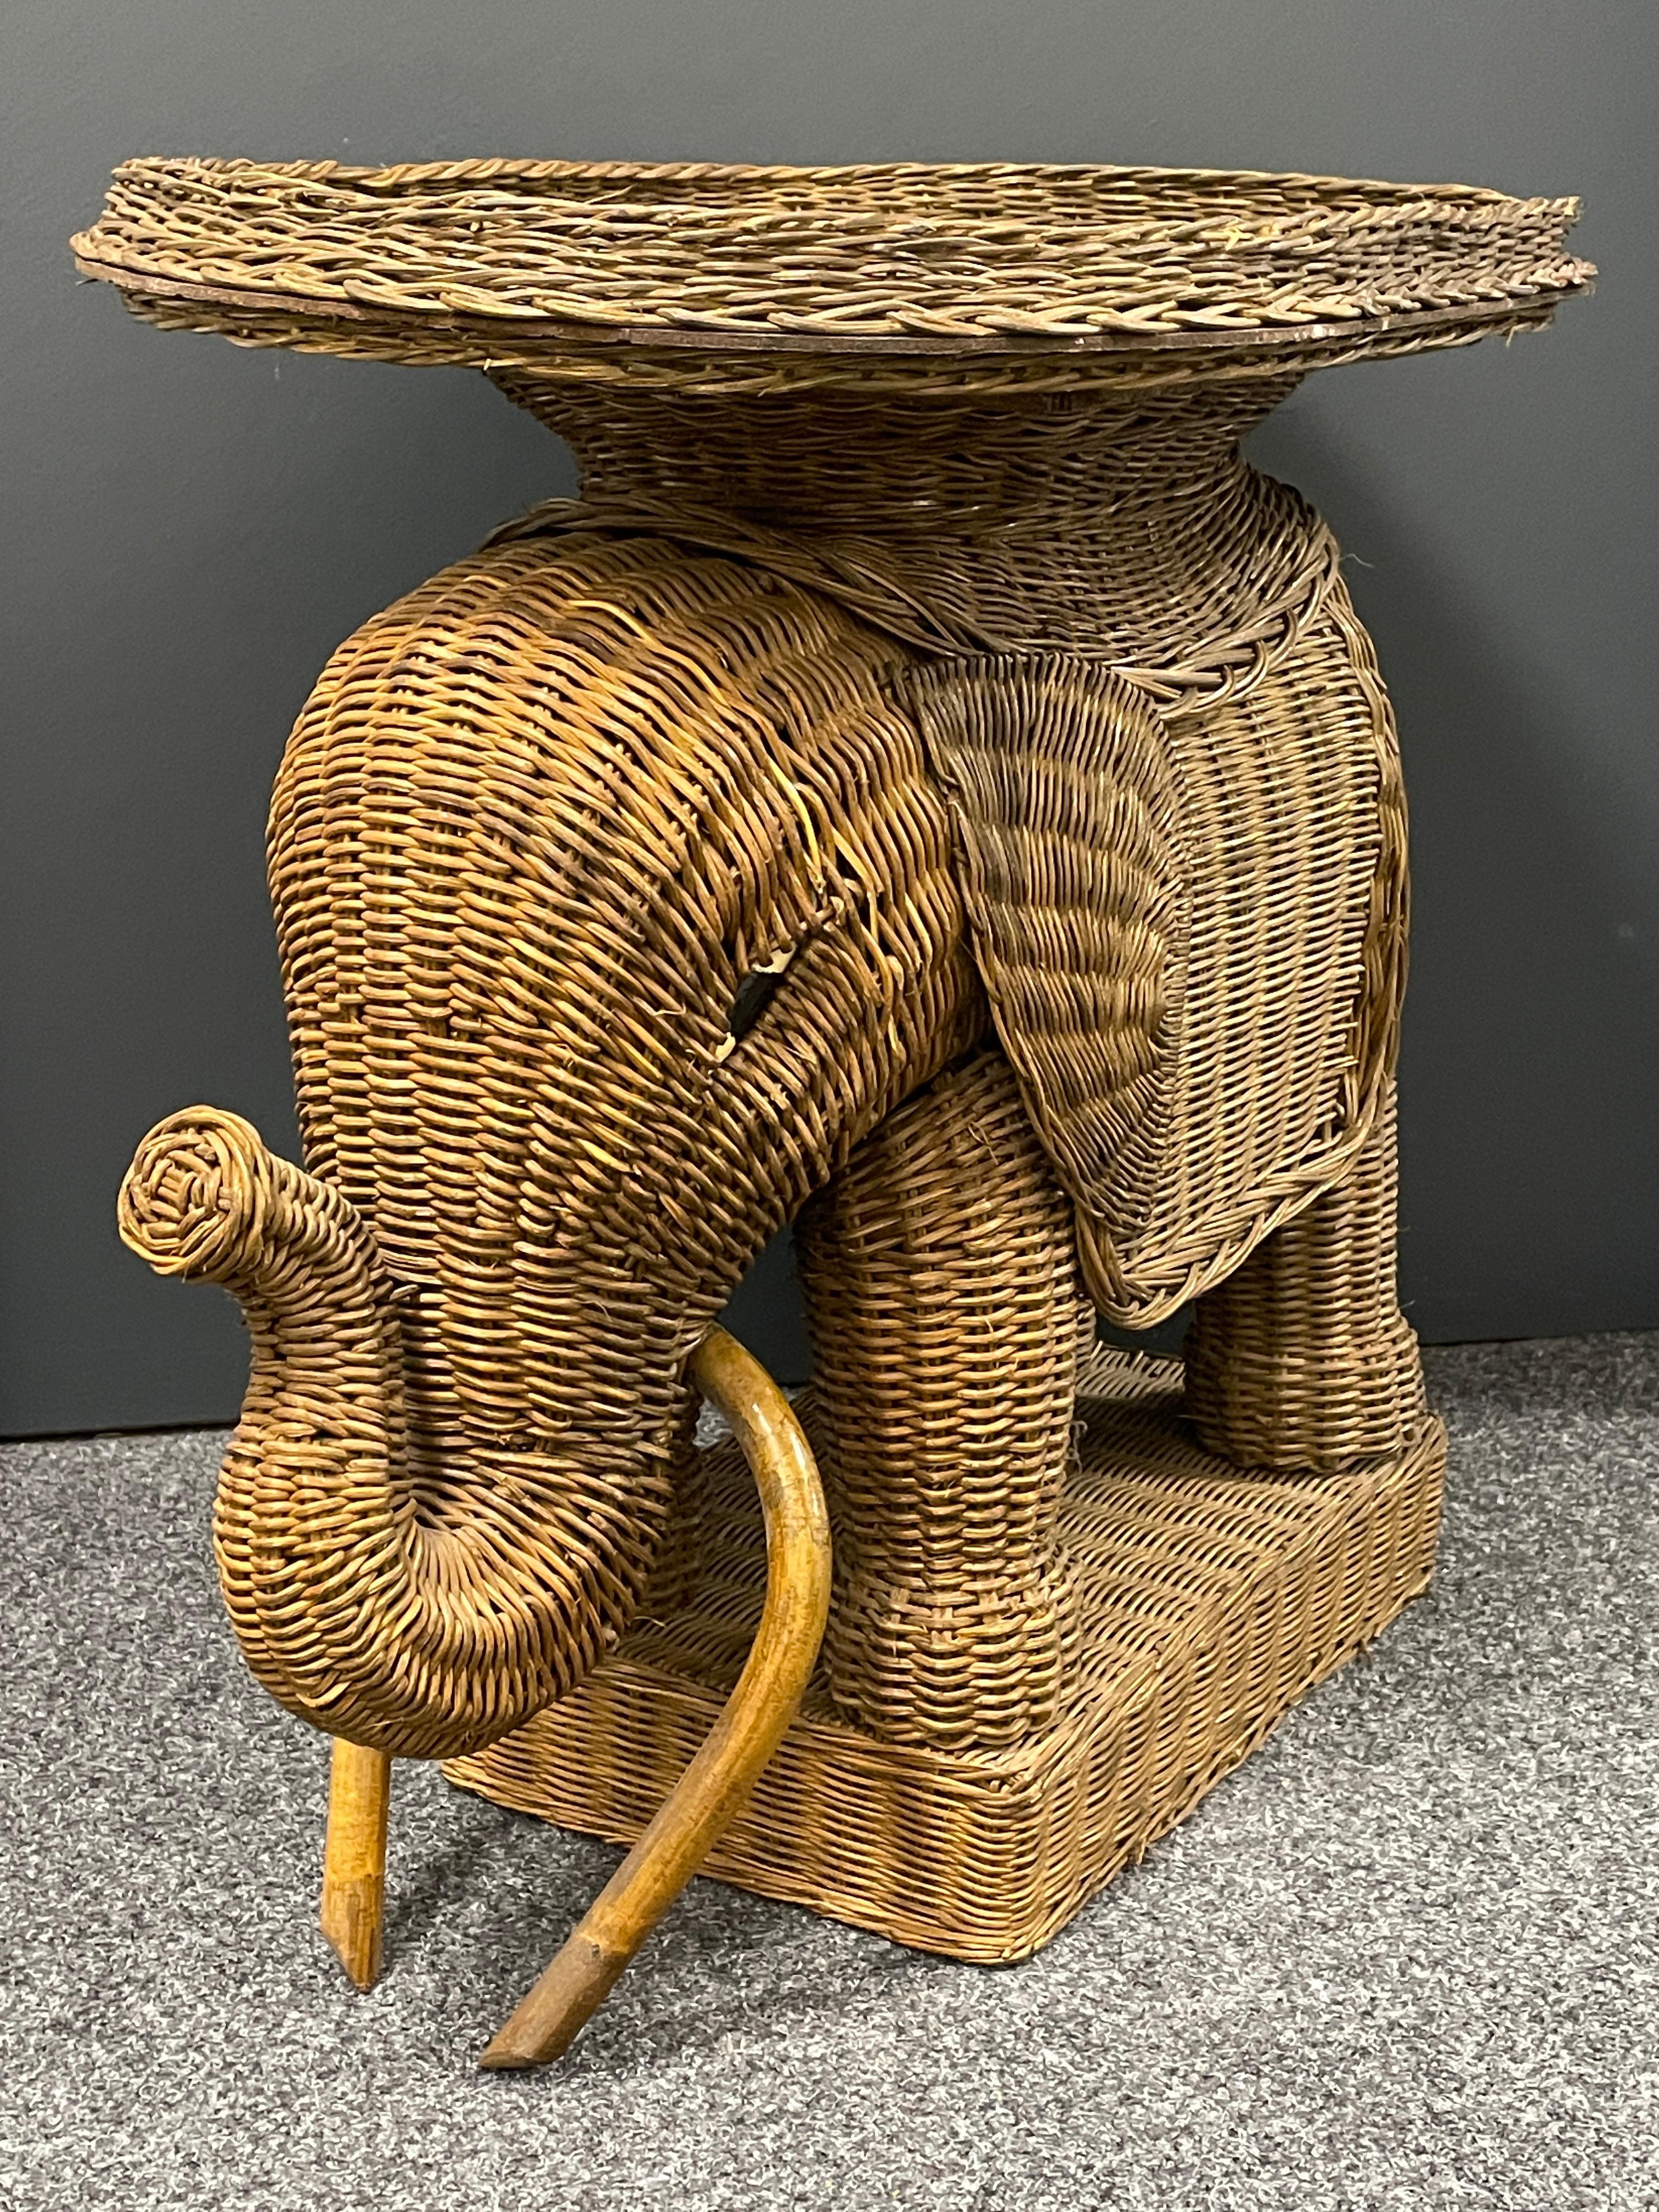 Hand-Crafted Stunning Rattan Wicker Elephant Side Table with Large Tray, France, 1960s